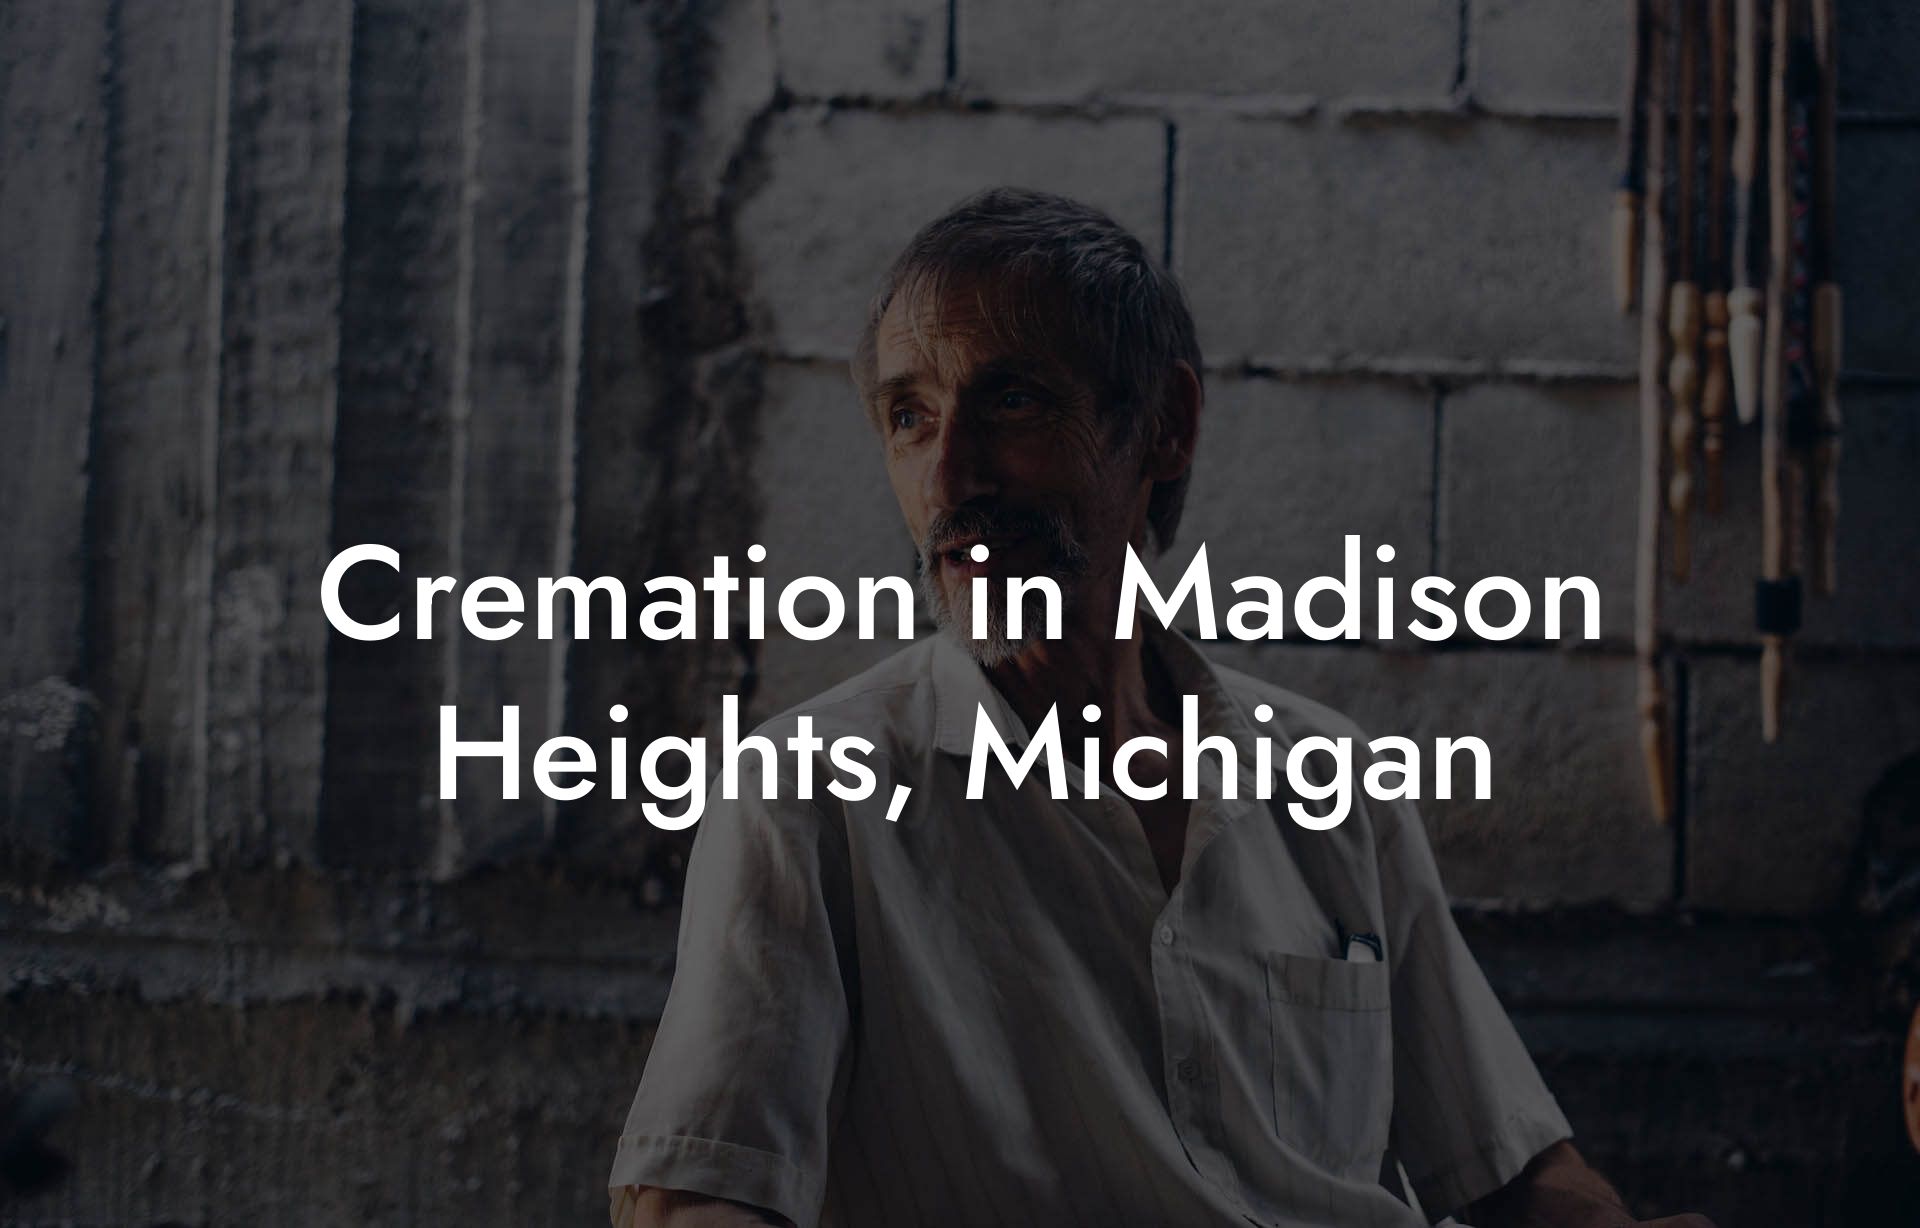 Cremation in Madison Heights, Michigan